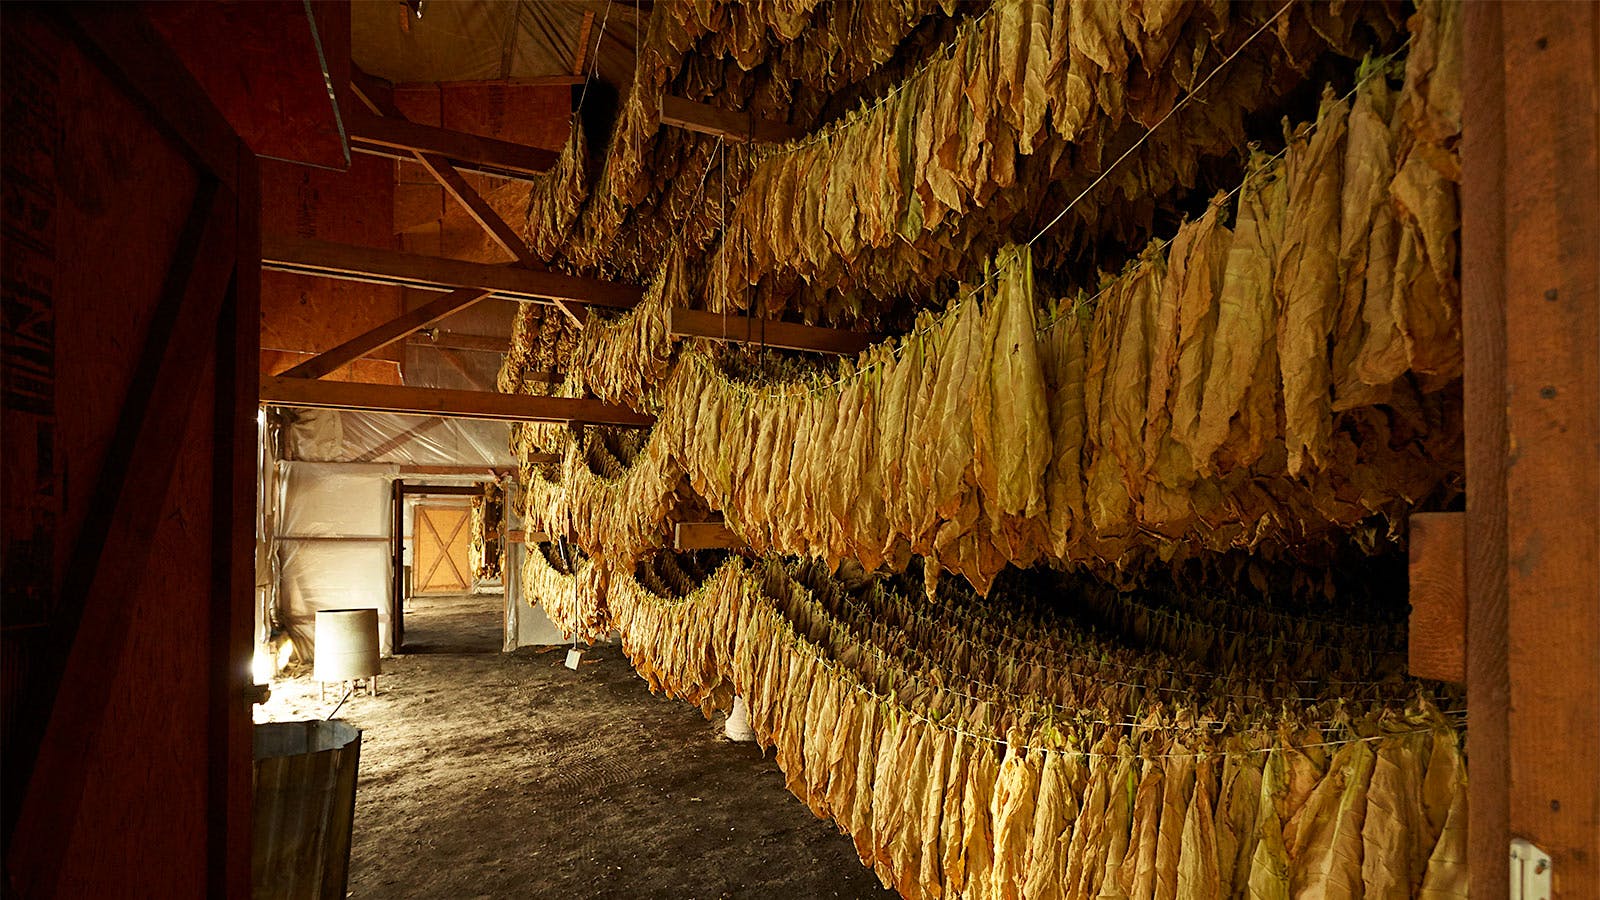 Shade leaves are strung together in small tied groupings or hands of tobacco and festooned across the rafters of a curing barn.